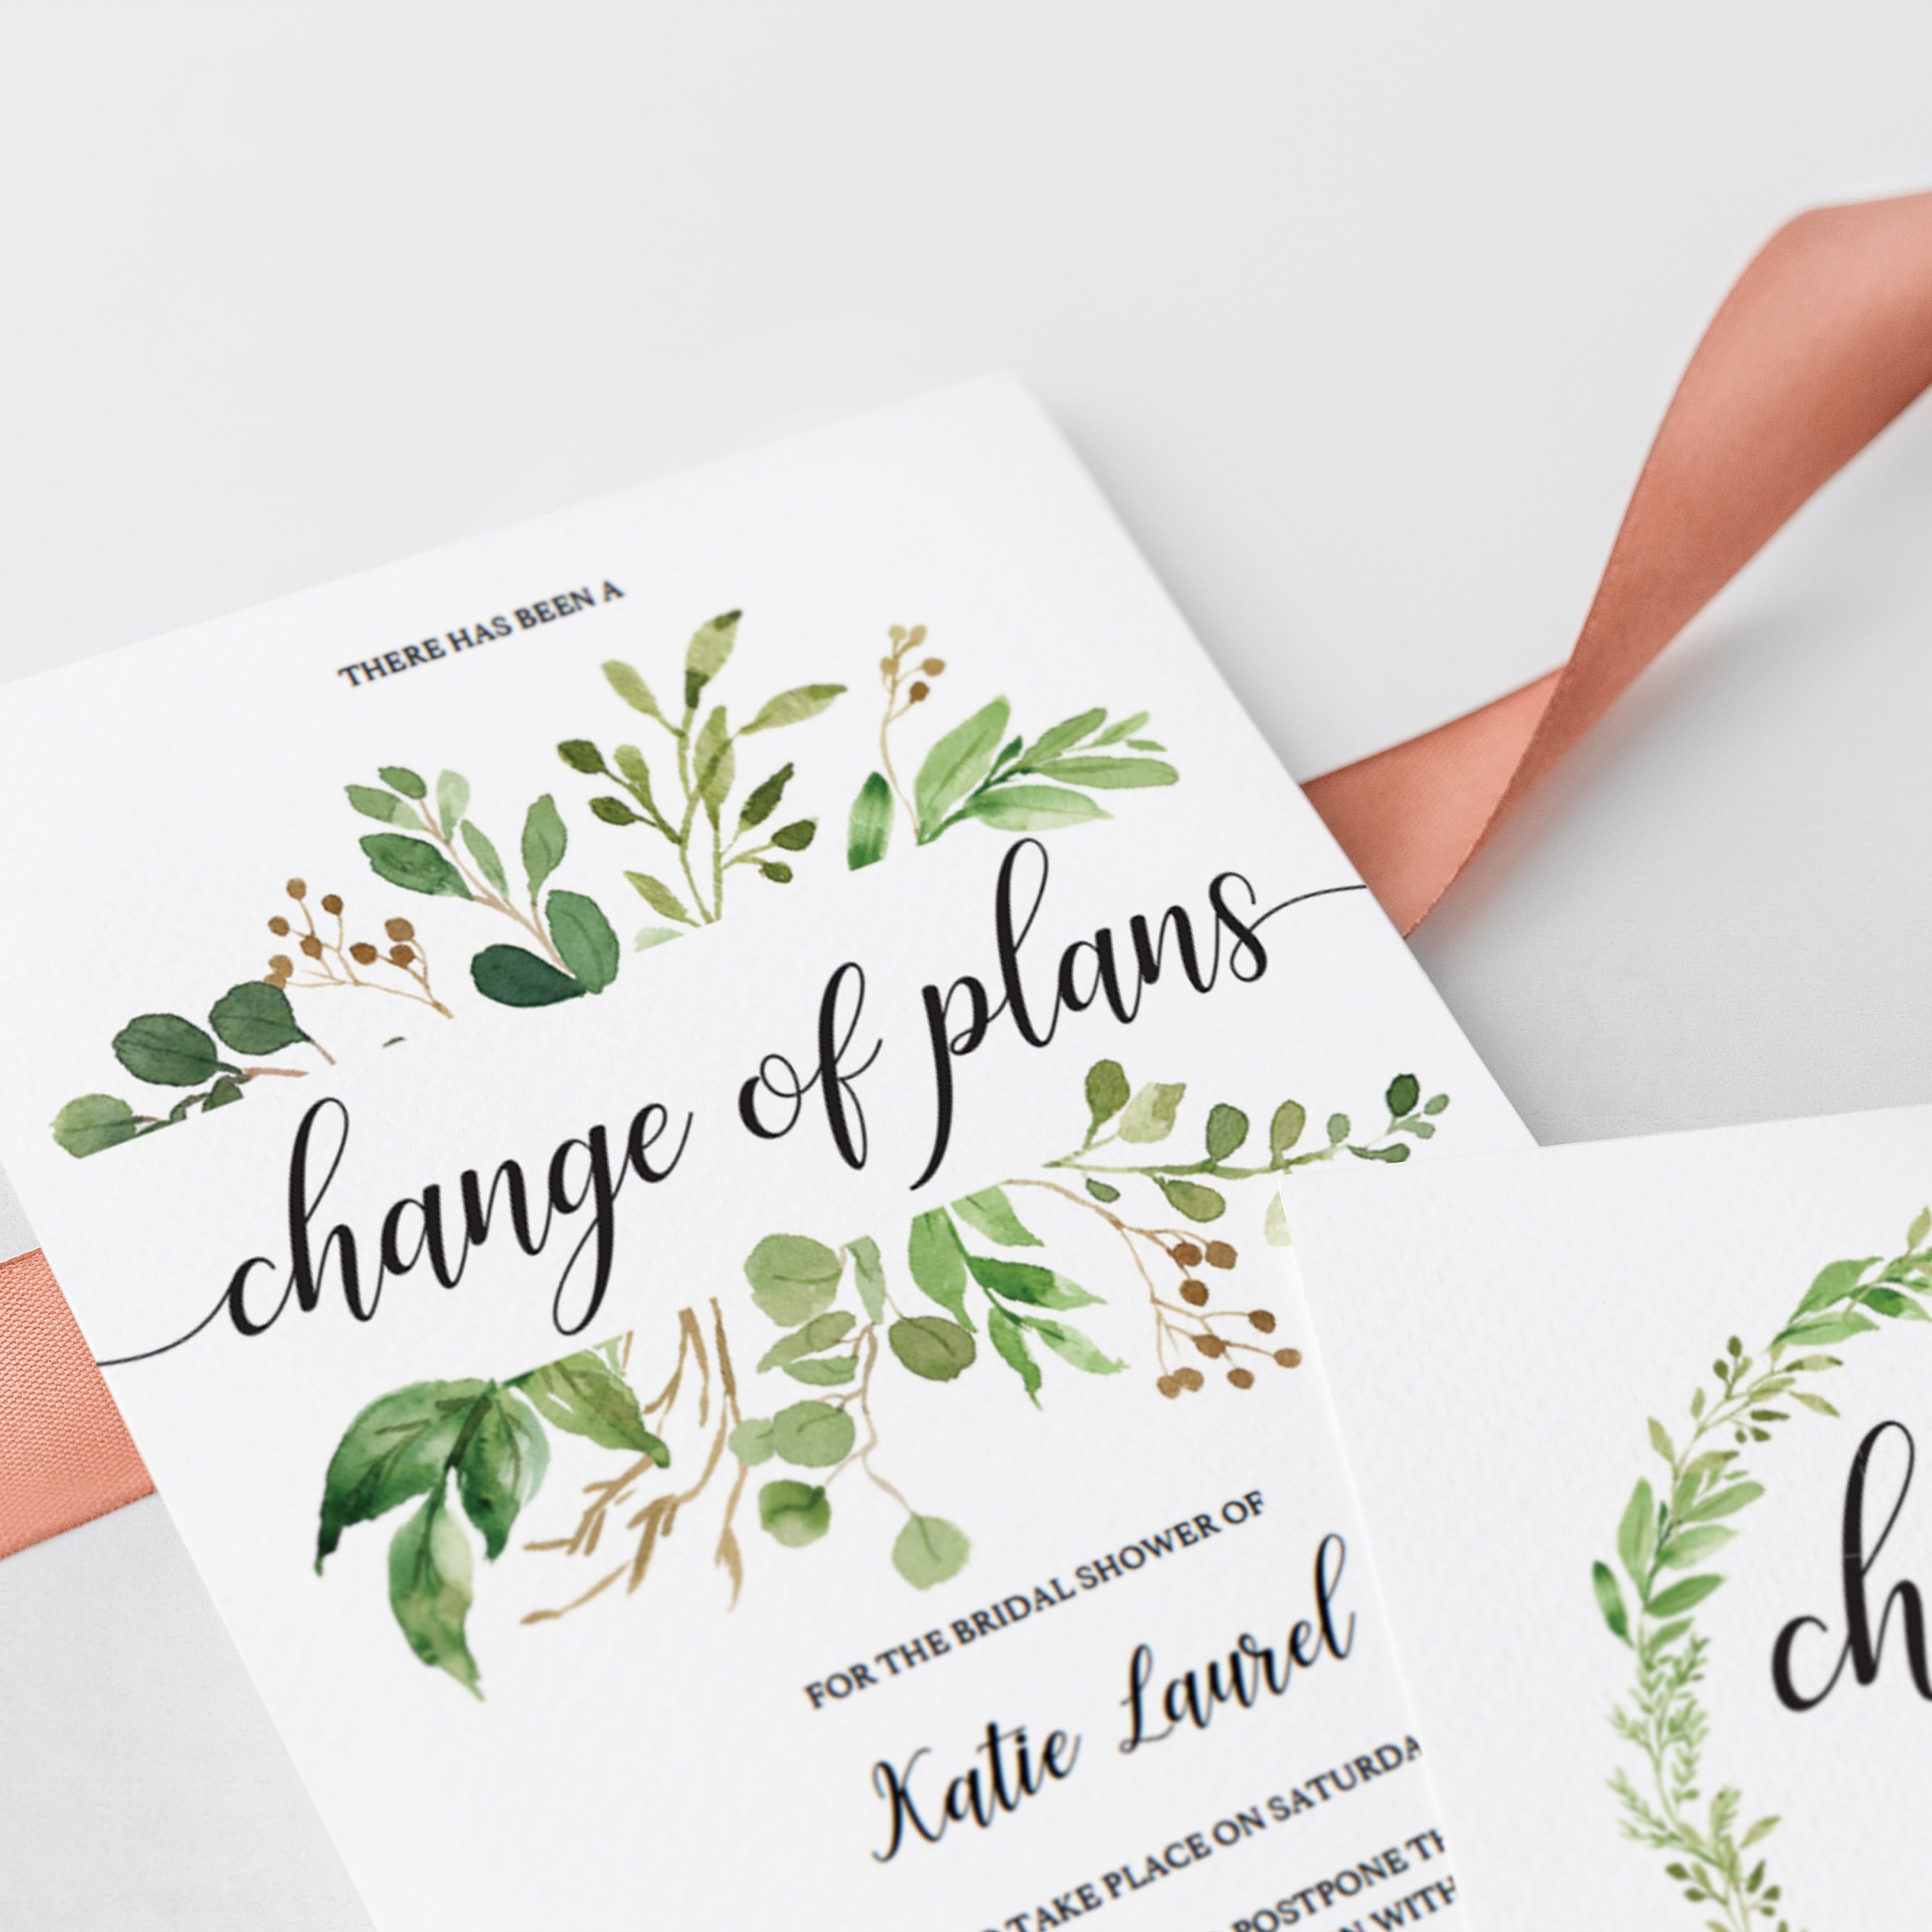 Green leaves change of plans event template by LittleSizzle